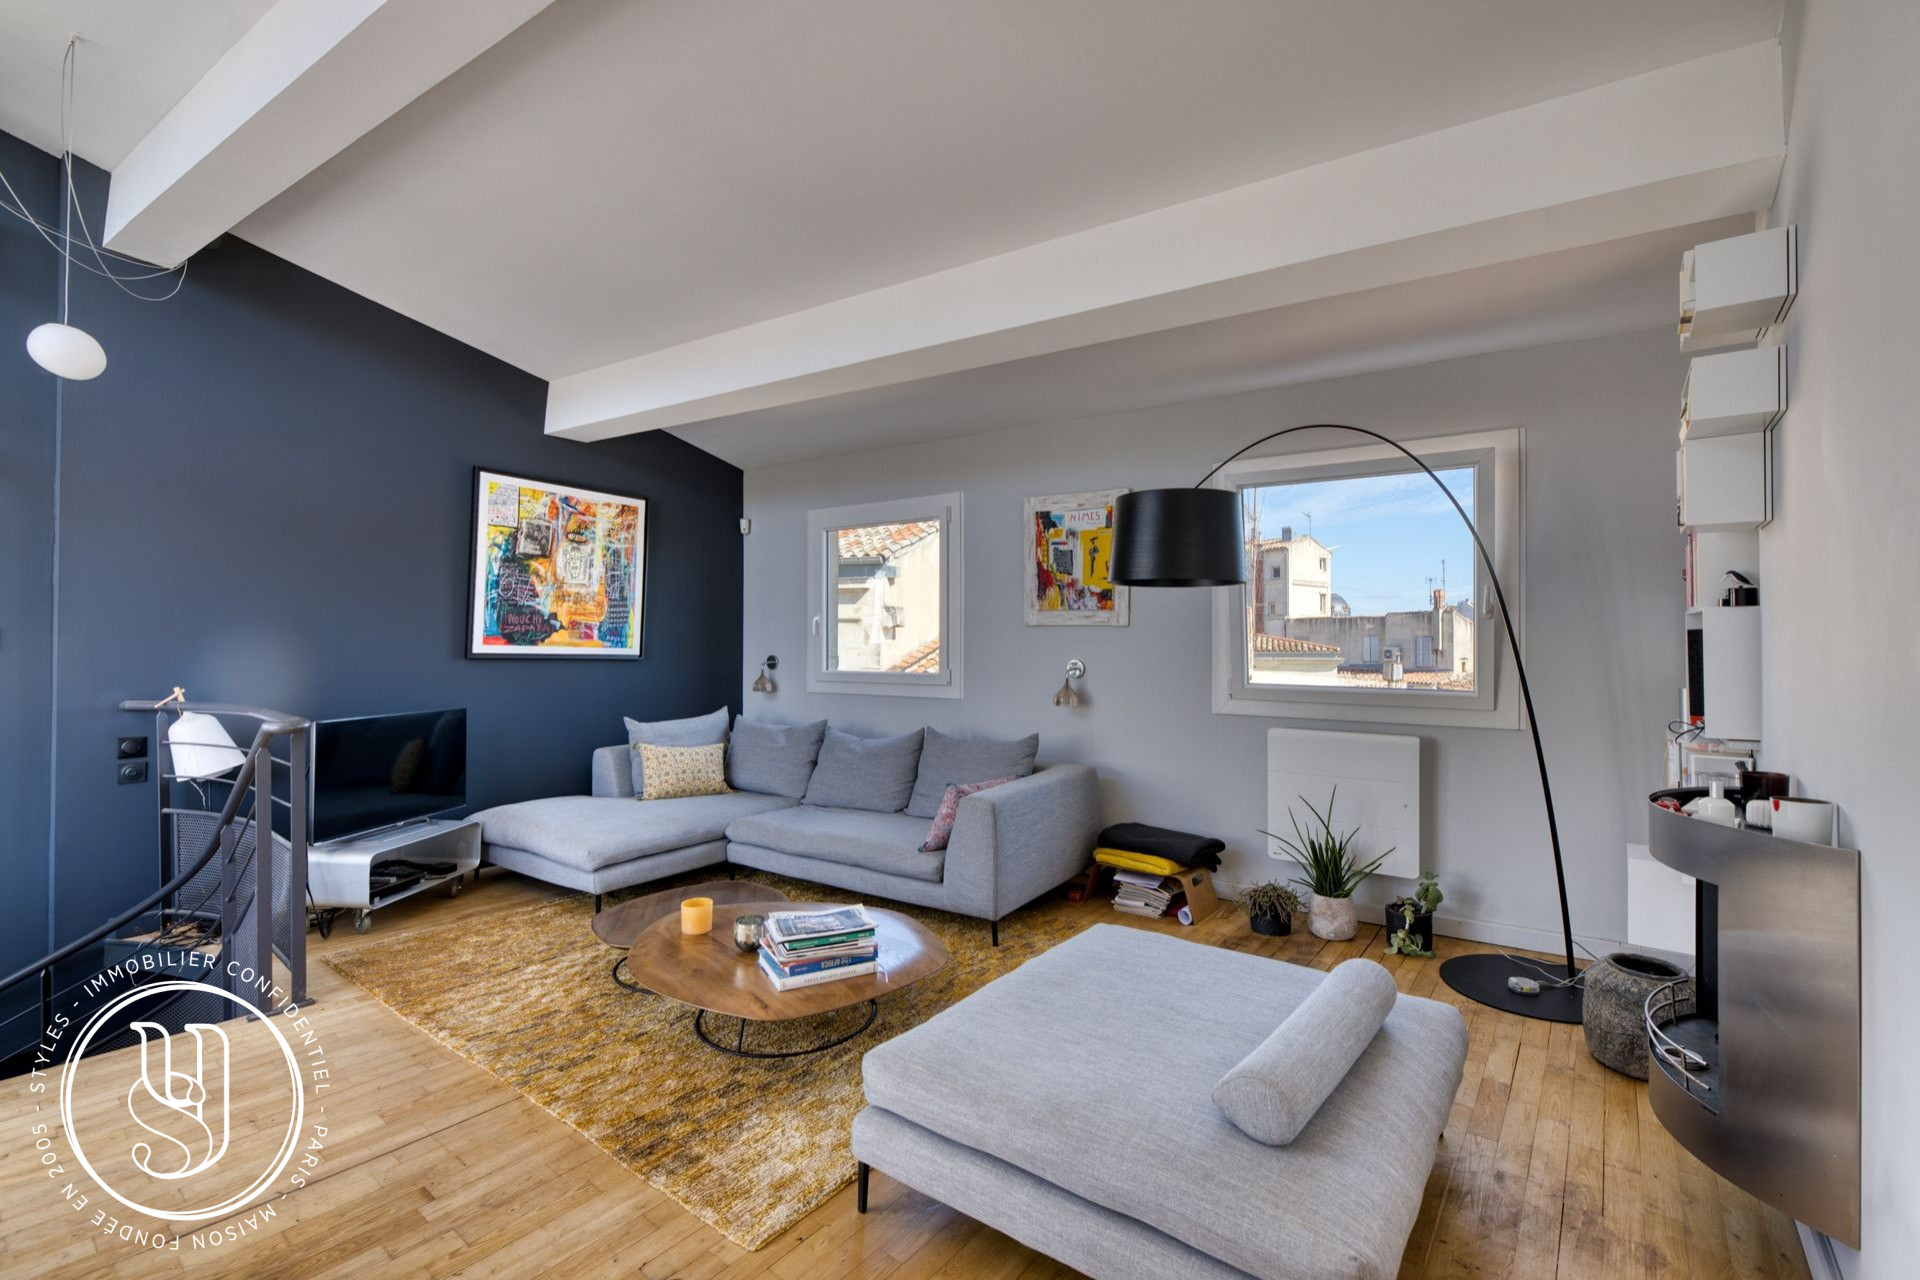 Montpellier - Sold by S T Y L E S, Ecusson, a flat with terraces... - image 6